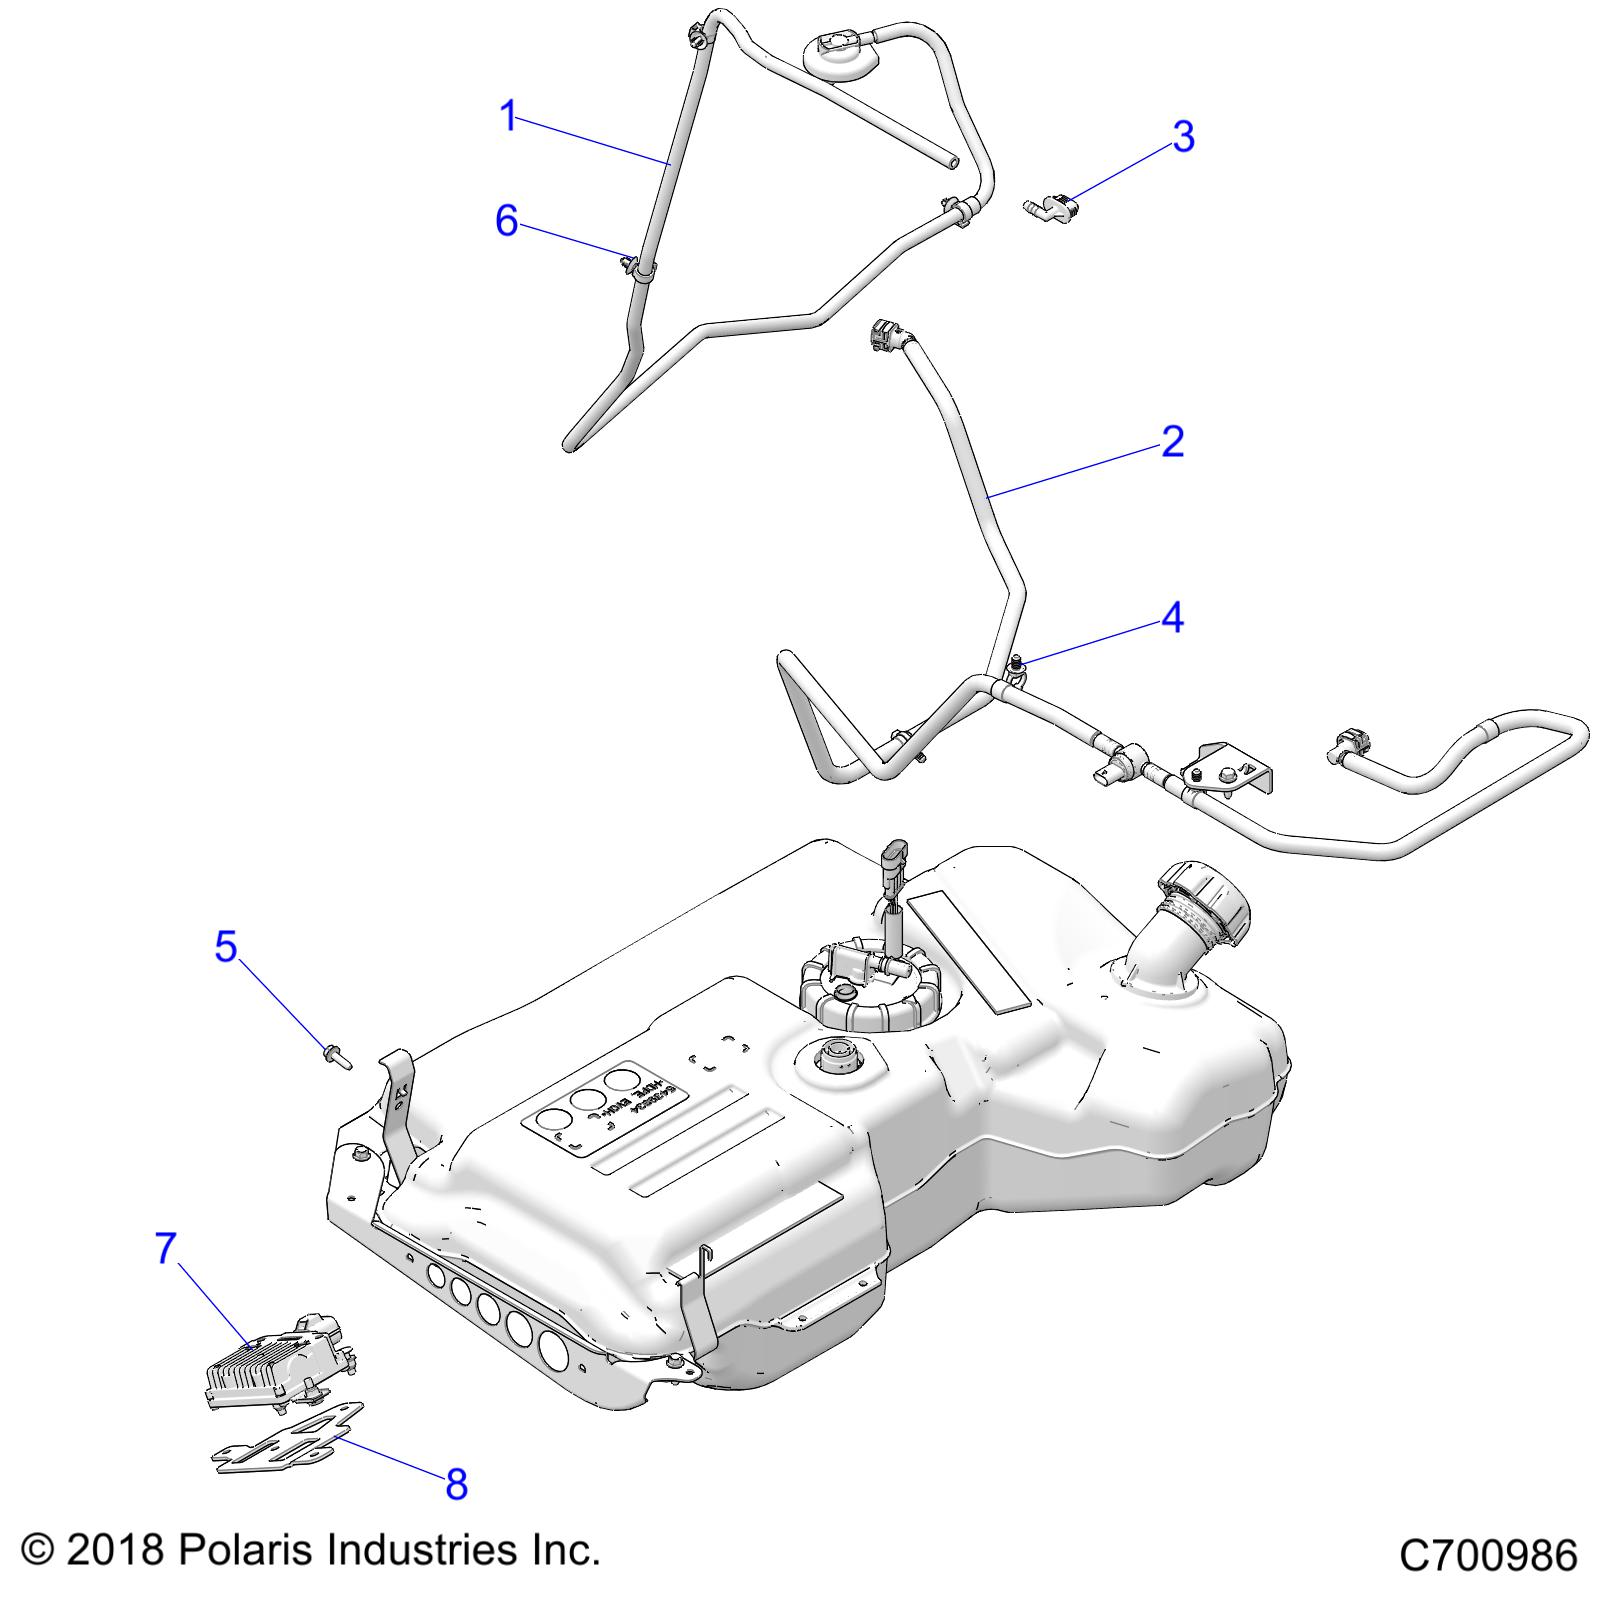 Part Number : 2521993 SUPPLY FUEL LINE ASSEMBLY